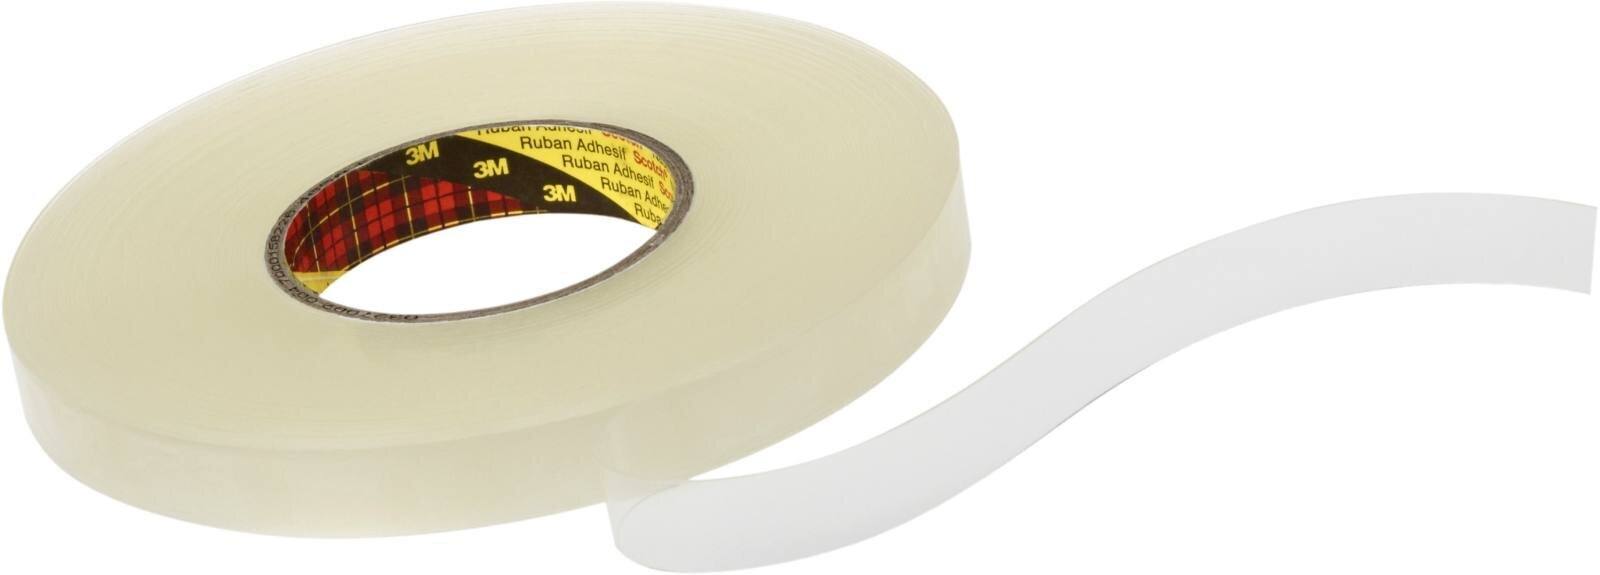 3M Double-sided removable adhesive tape 4658F, transparent, 295 mm x 25 m, 0.8 mm